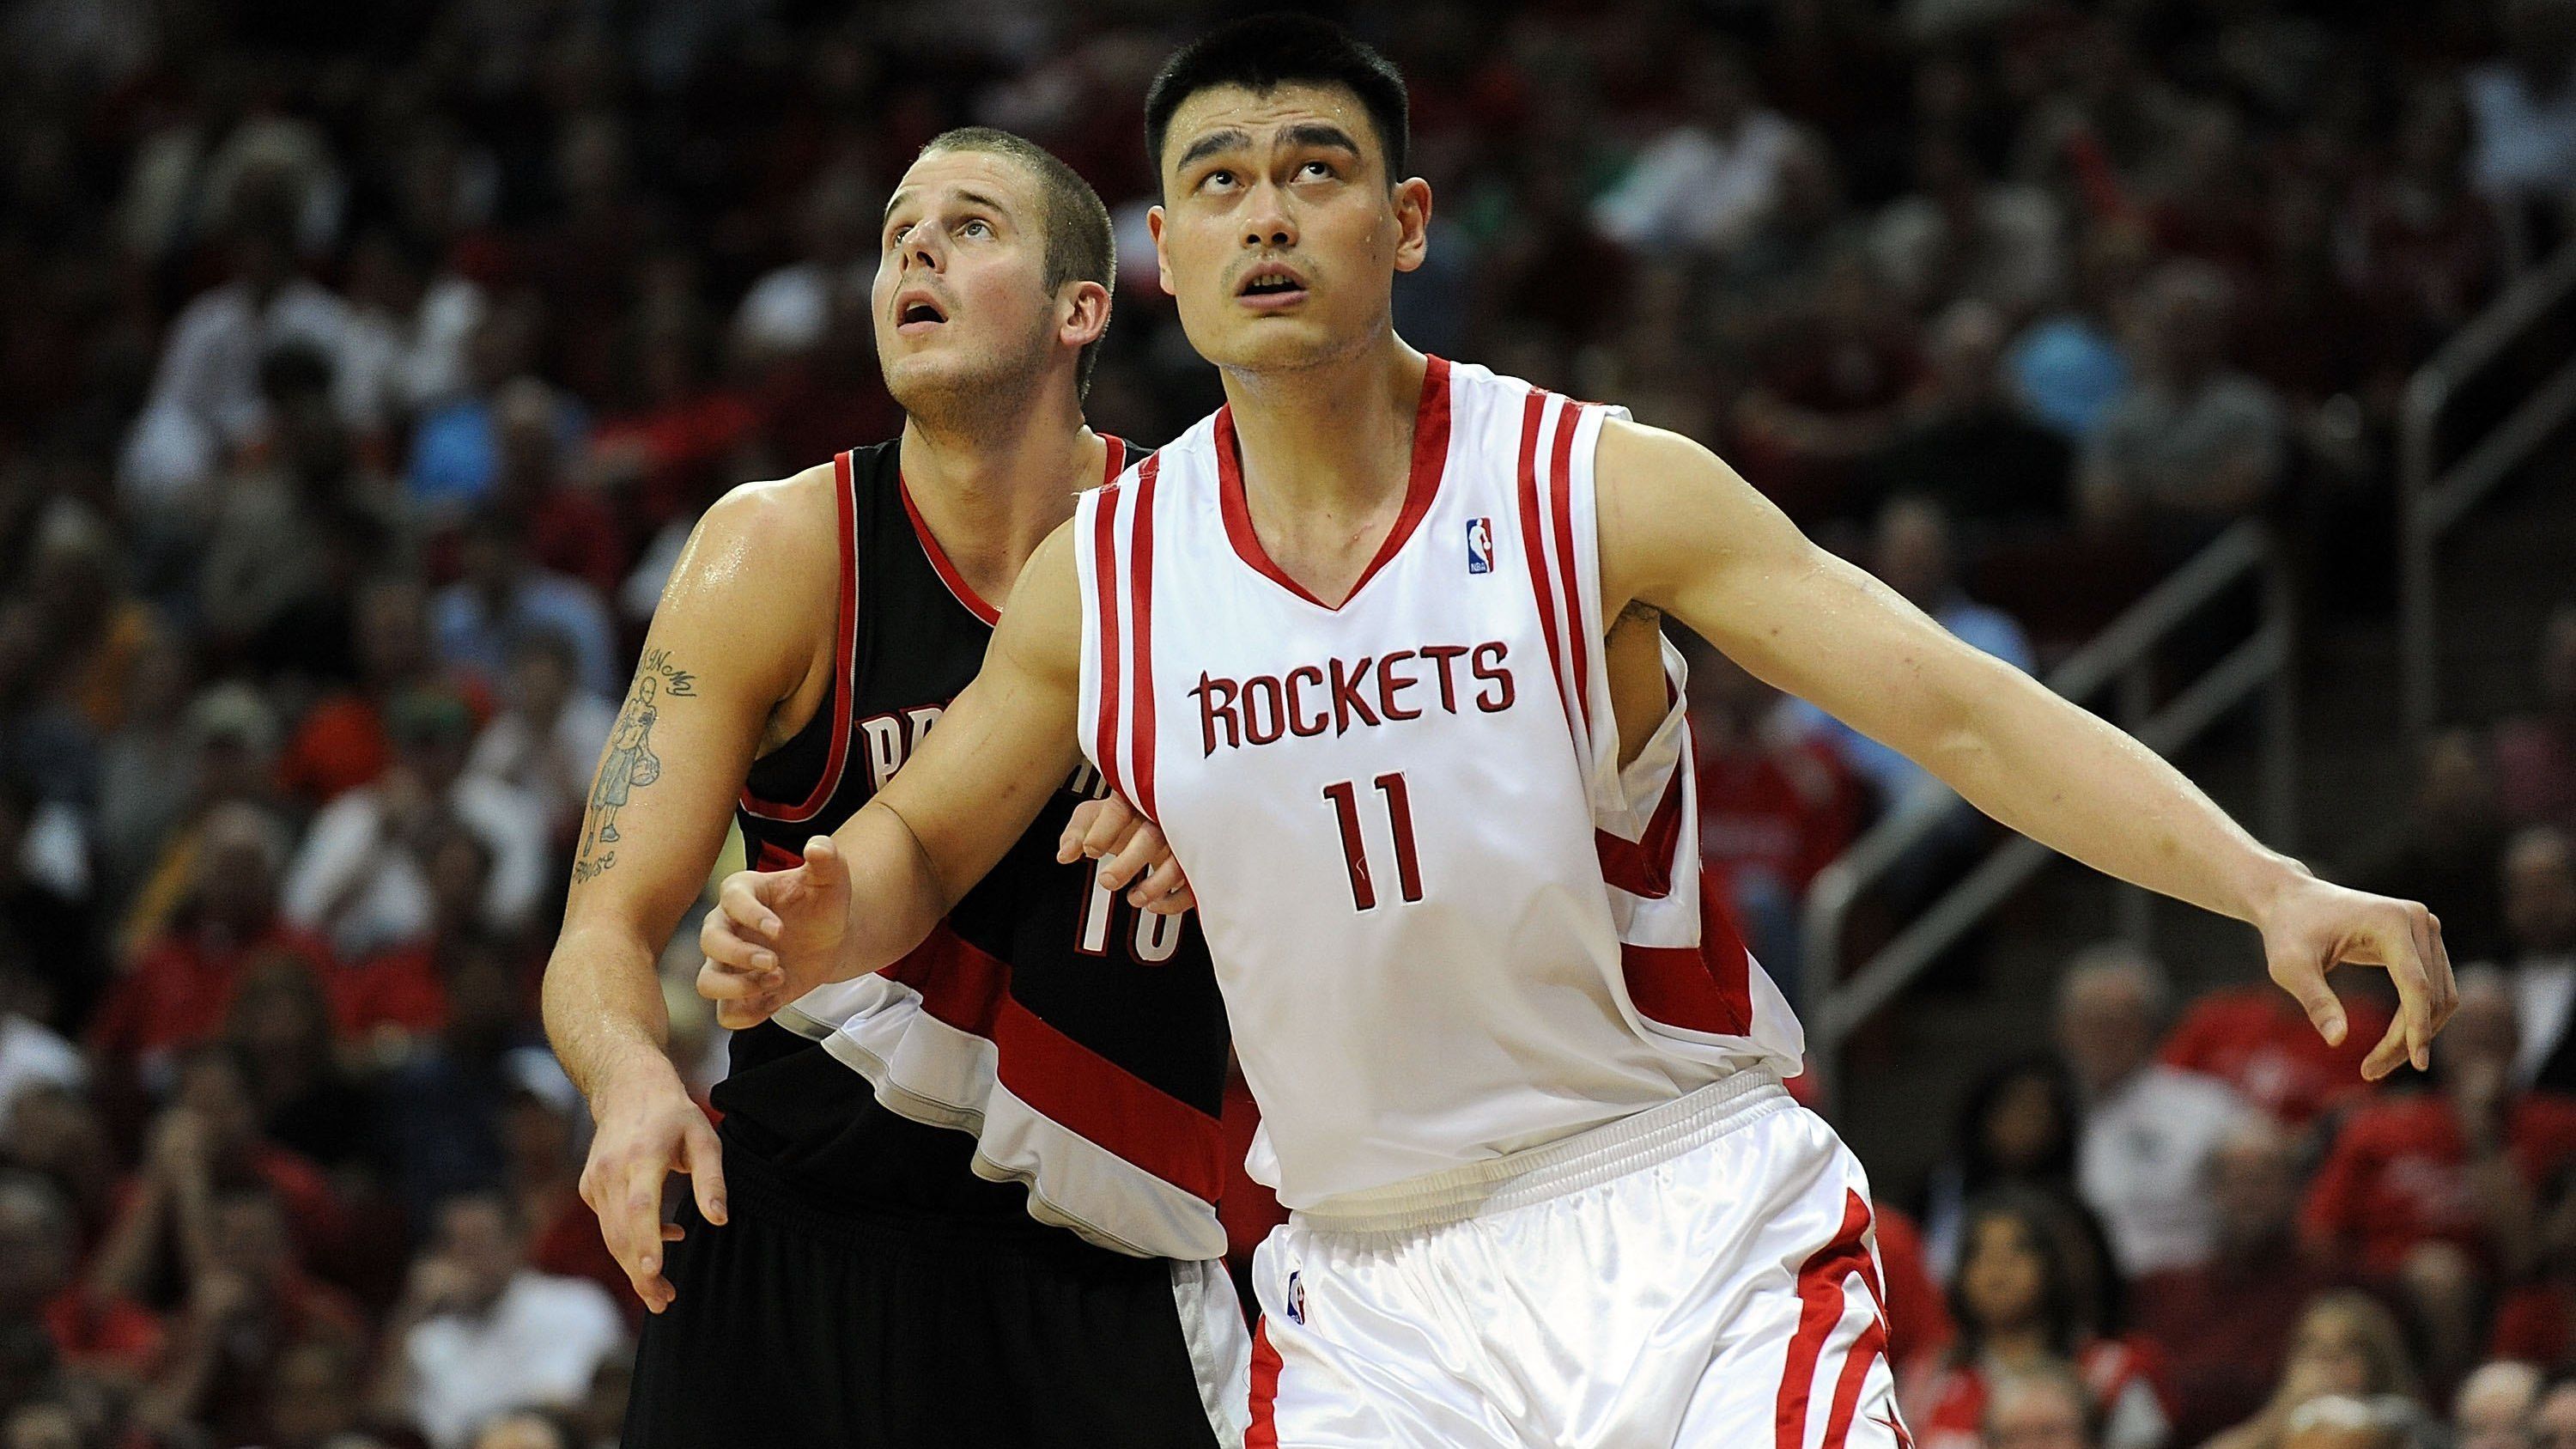 <strong>Yao Ming - 2,29m</strong><br><strong>Teams:</strong> Houston Rockets<br><strong>Karriere-Stats:</strong> 19,0 Punkte, 9,2 Rebounds, 1,6 Assists, 1,9 Blocks<br><strong>Auszeichnungen:</strong> 8x All-Star, 5x All-NBA,